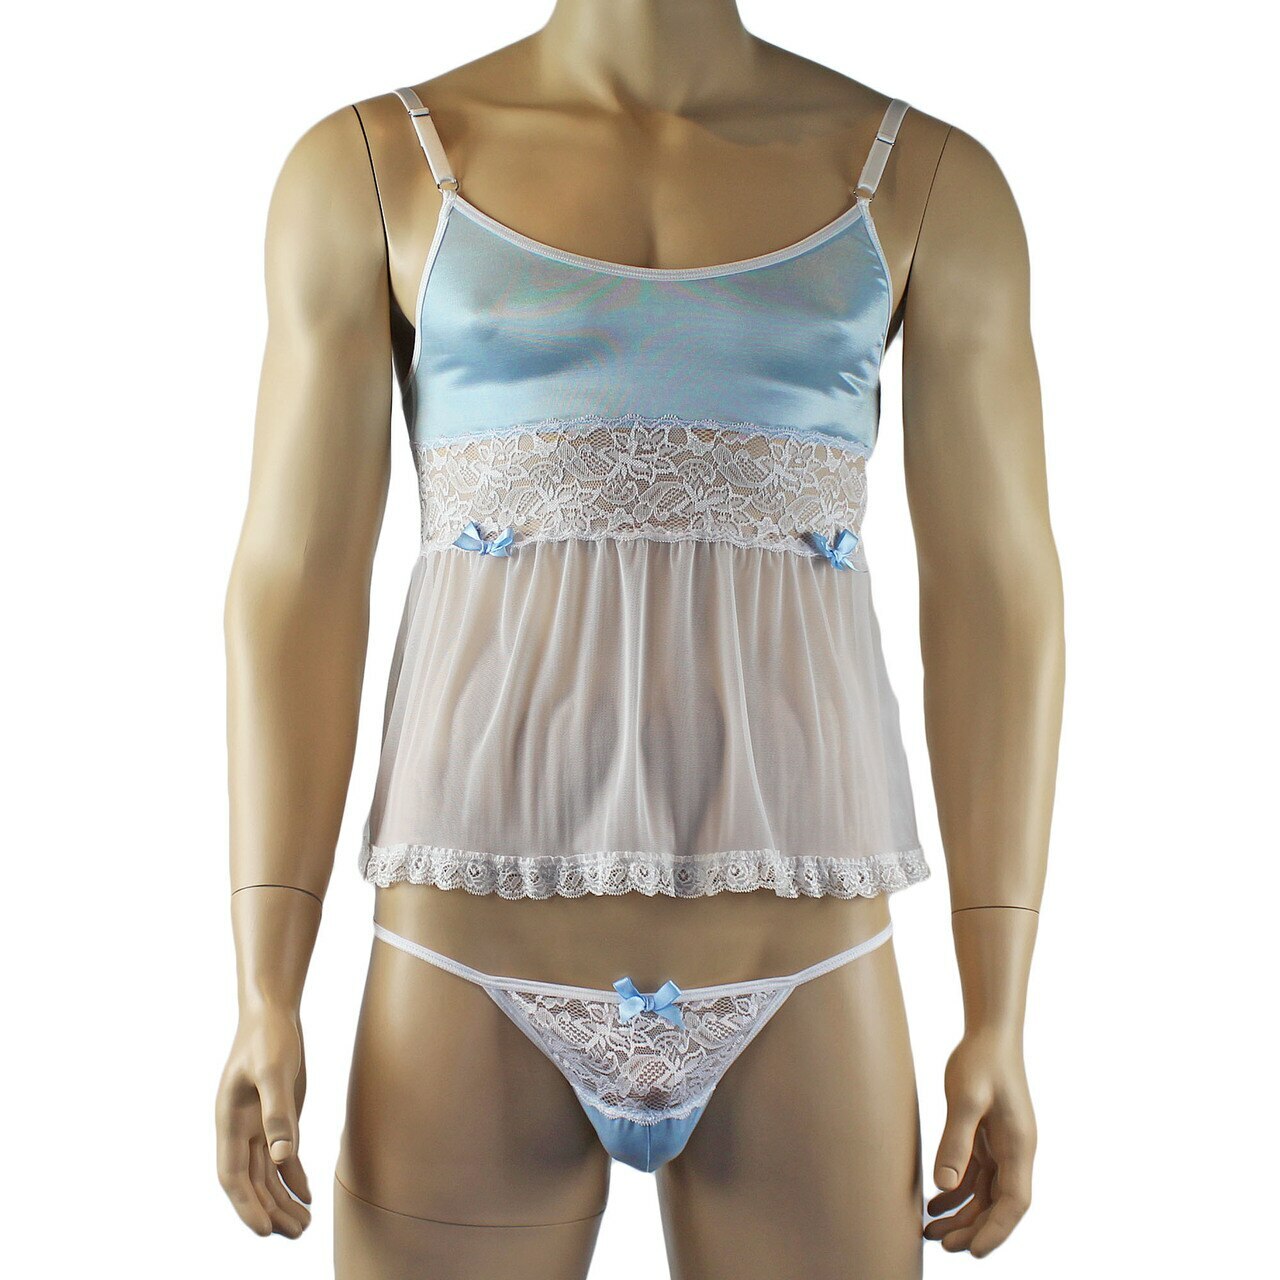 Mens Joanne Mini Babydoll Camisole & G string - Sizes up to 3XL Light Blue and White